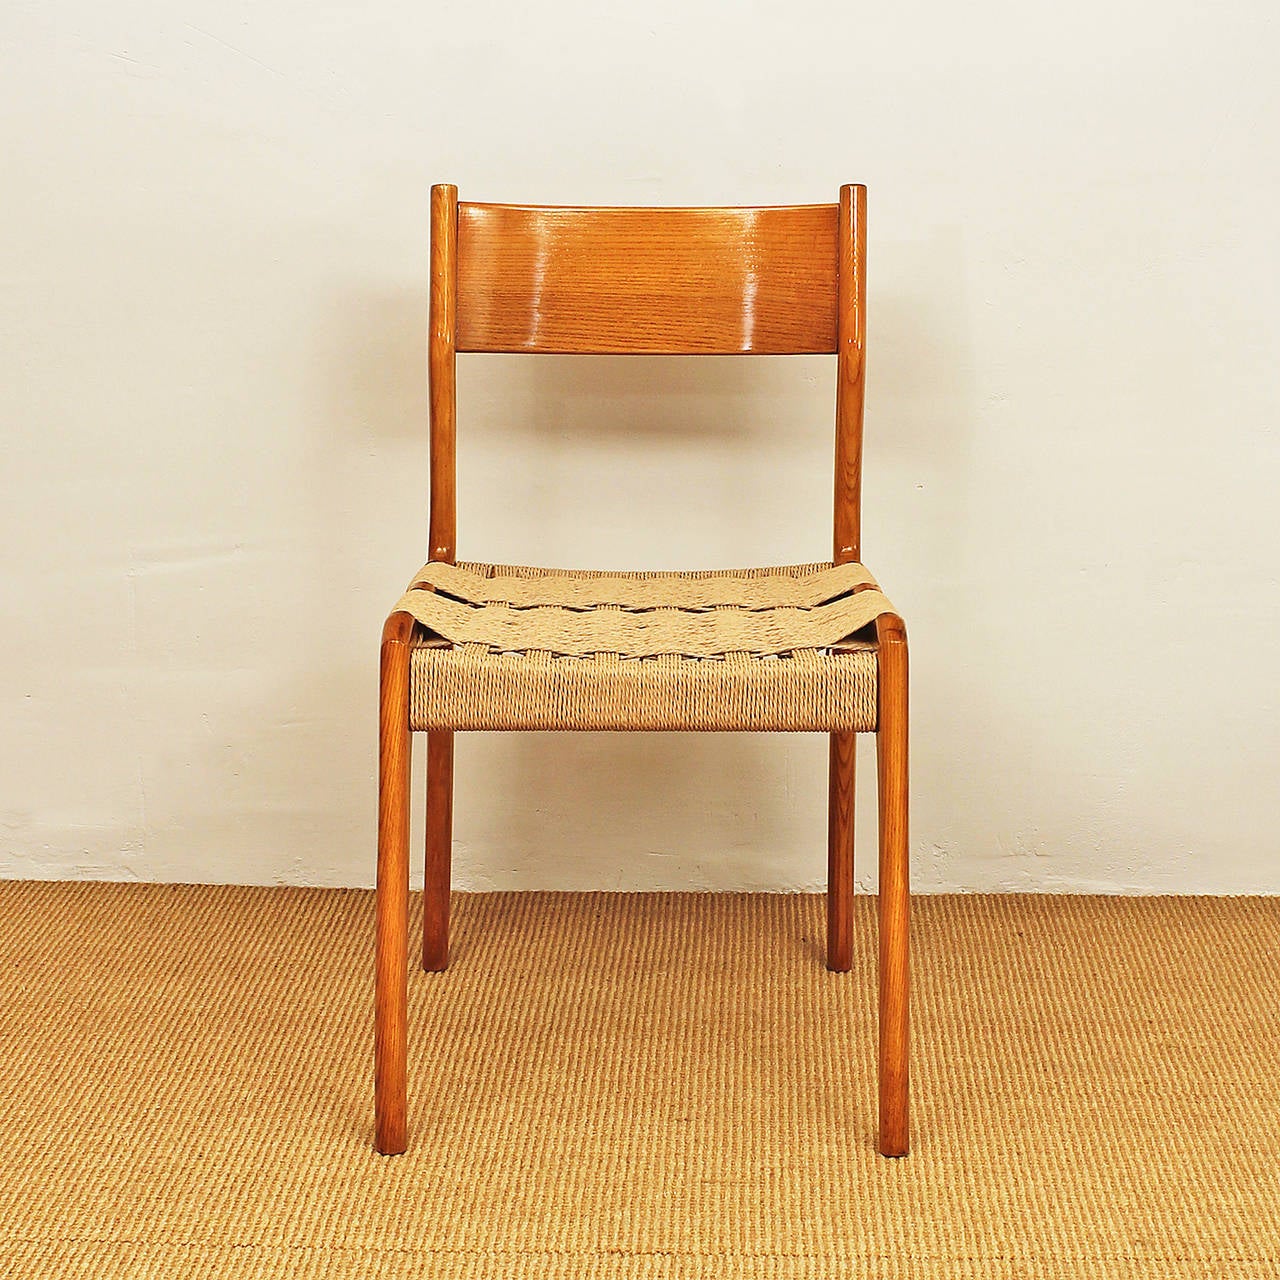 Ten splendid chairs, solid ashwood, French polish, seat re-stringed with natural fiber and the same pattern. Very comfortable, stamped as patented model and manufacturer (illegible) behind the ropes,
Italy, circa 1950.